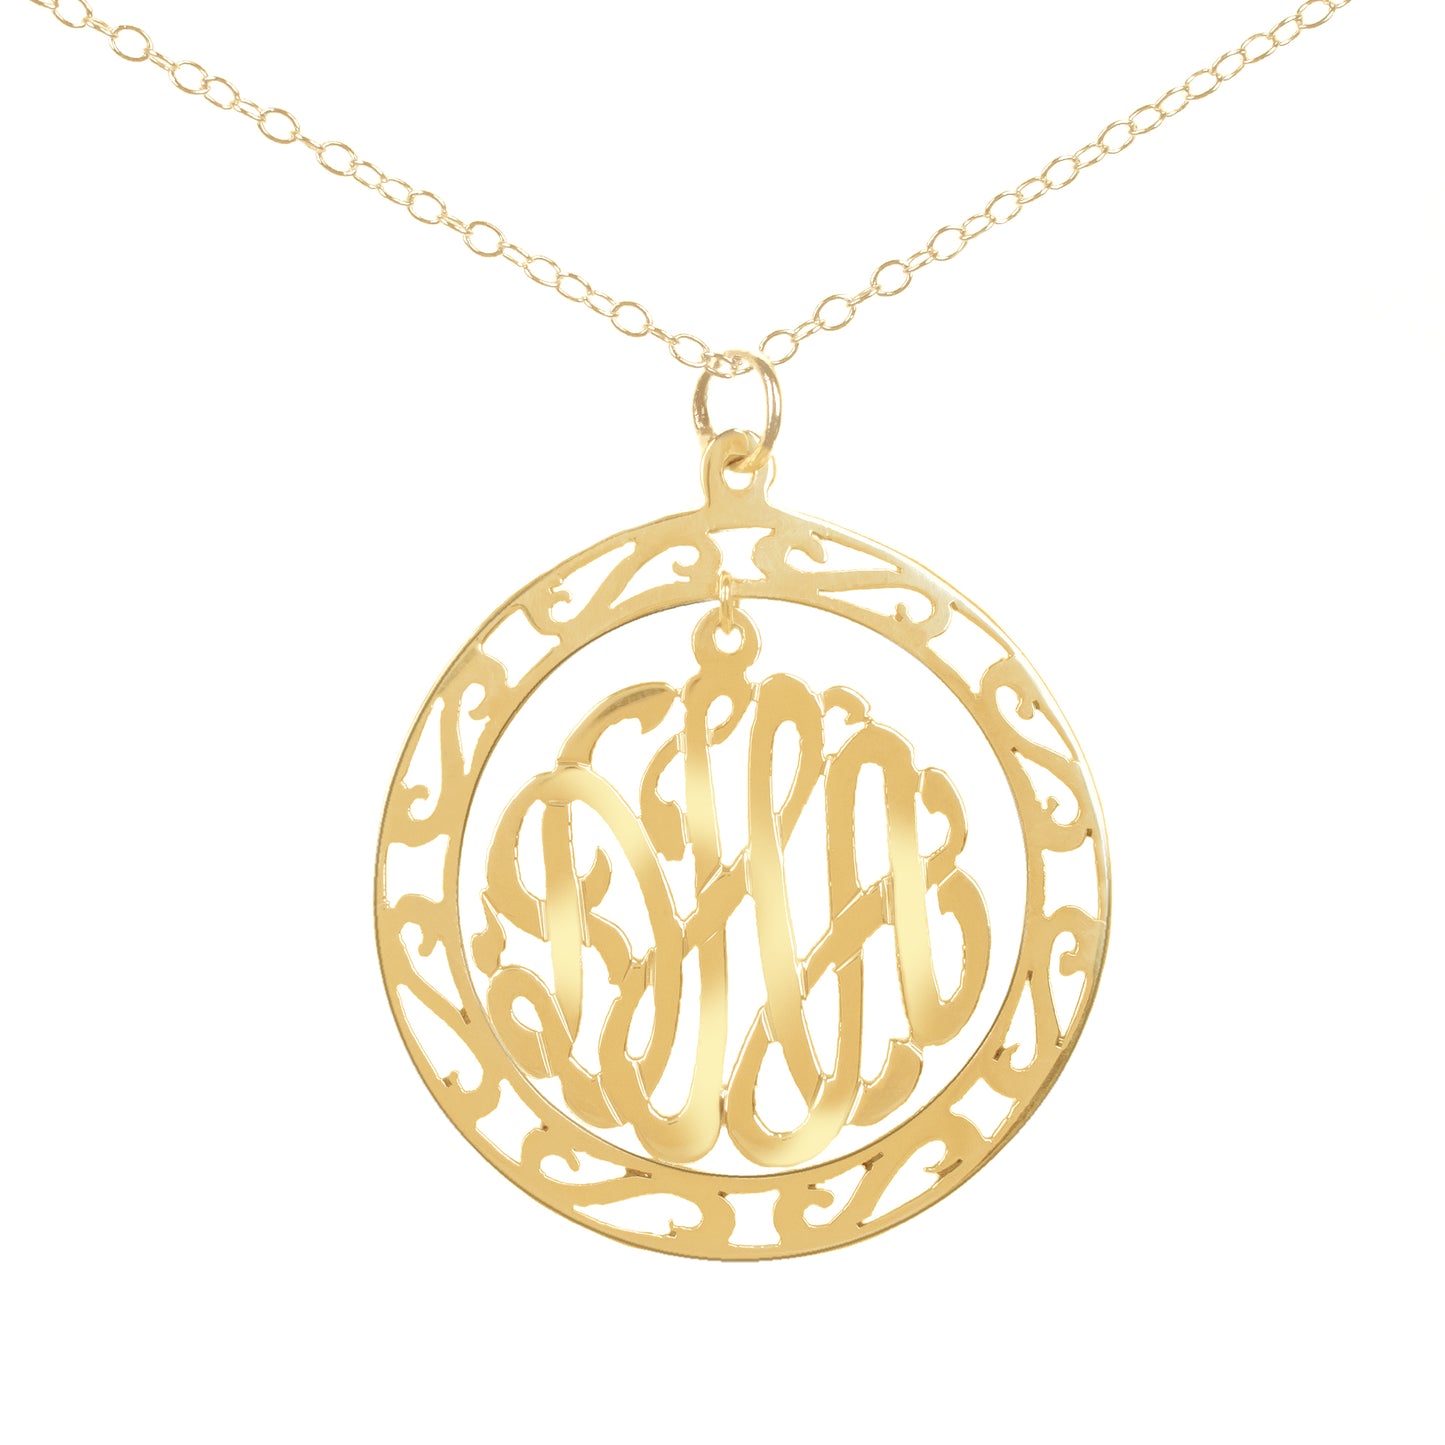 gold-plated silver round monogram necklace hanging inside a hollow patterned circle pendant